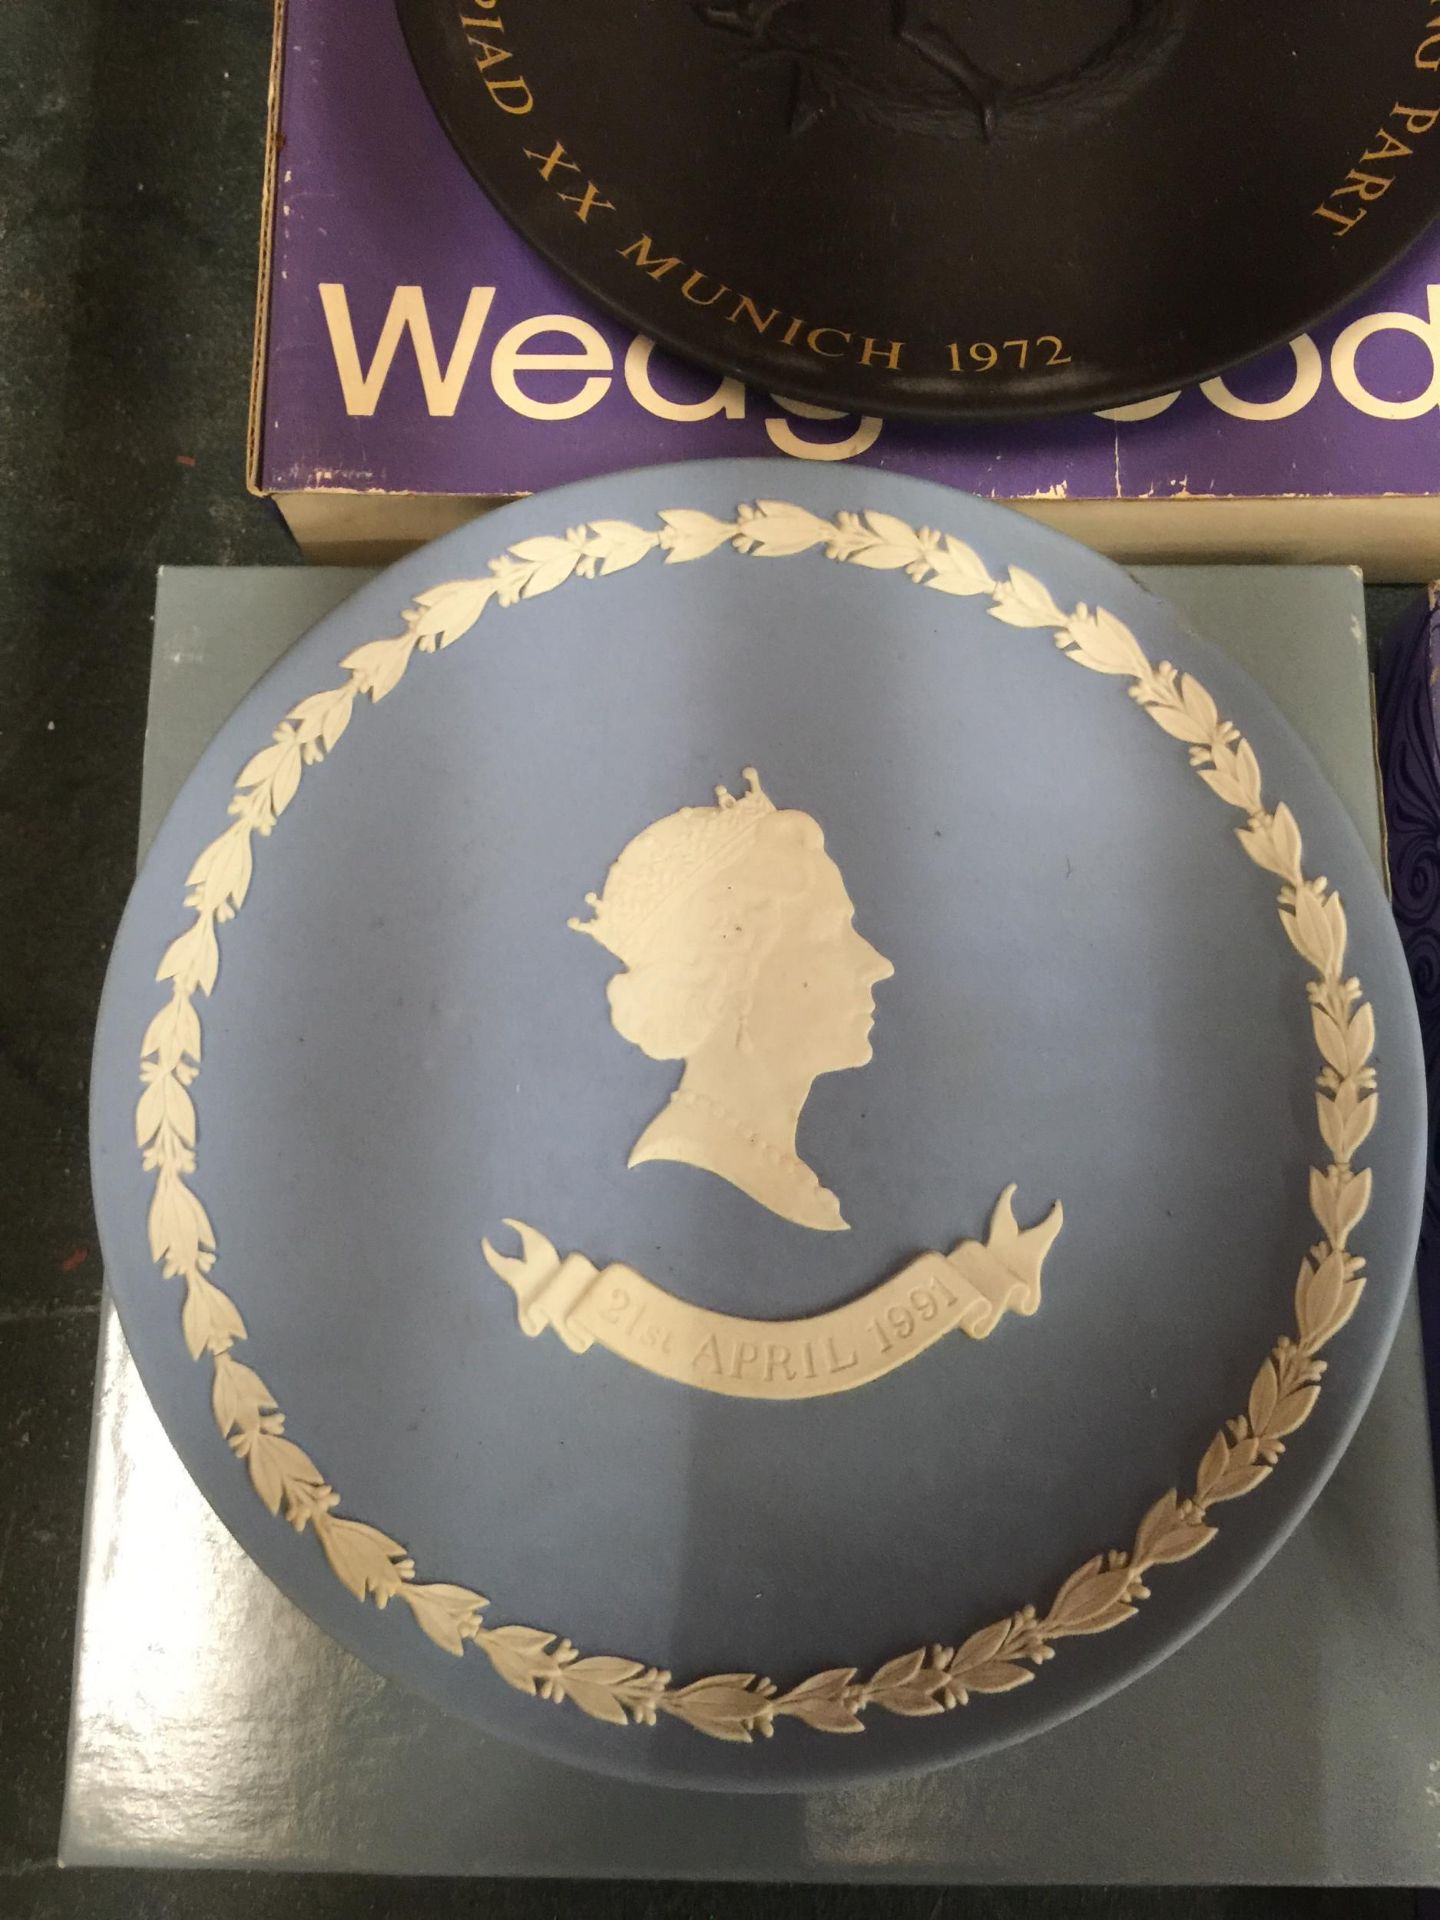 SIX BOXED WEDGWOOD OLYMPIC COLLECTOR'S PLATES - Image 5 of 6